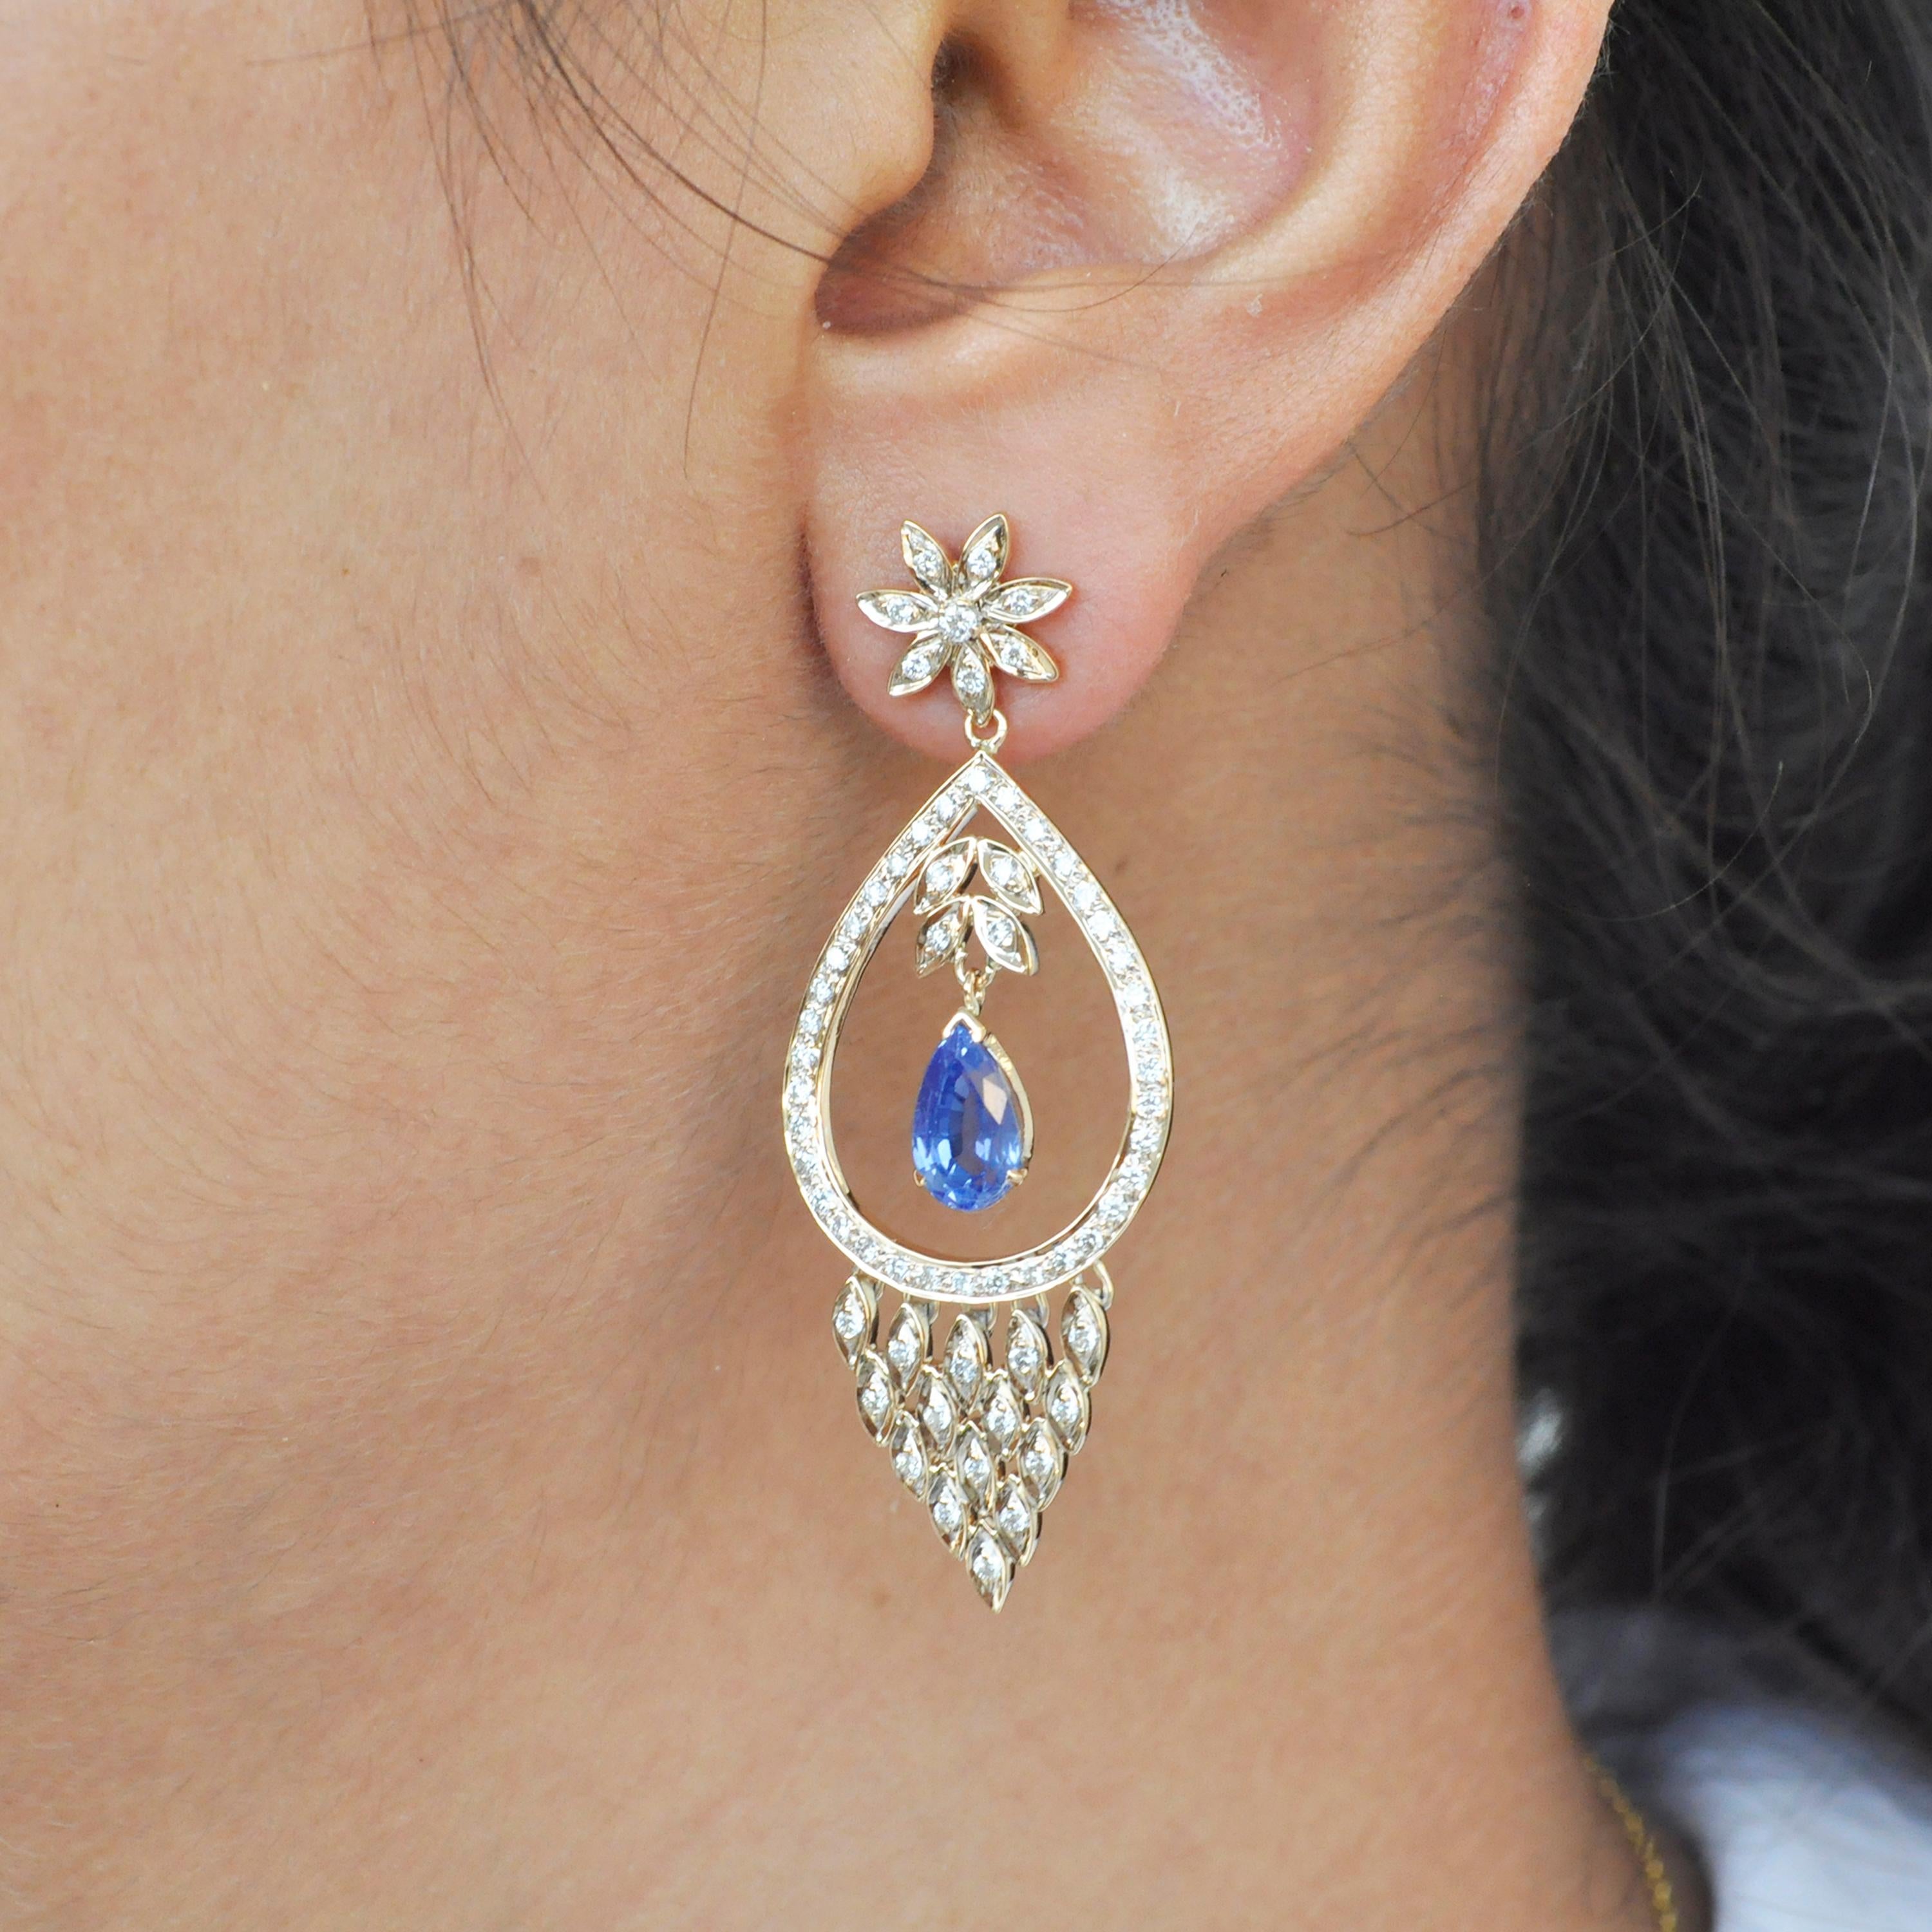 These elegant dangler earrings with diamond and blue sapphire are sure to make a statement, when you wear them among your family and friends. A perfect combination of fashion and chic style, these earrings are beautifully crafted in 18K yellow gold